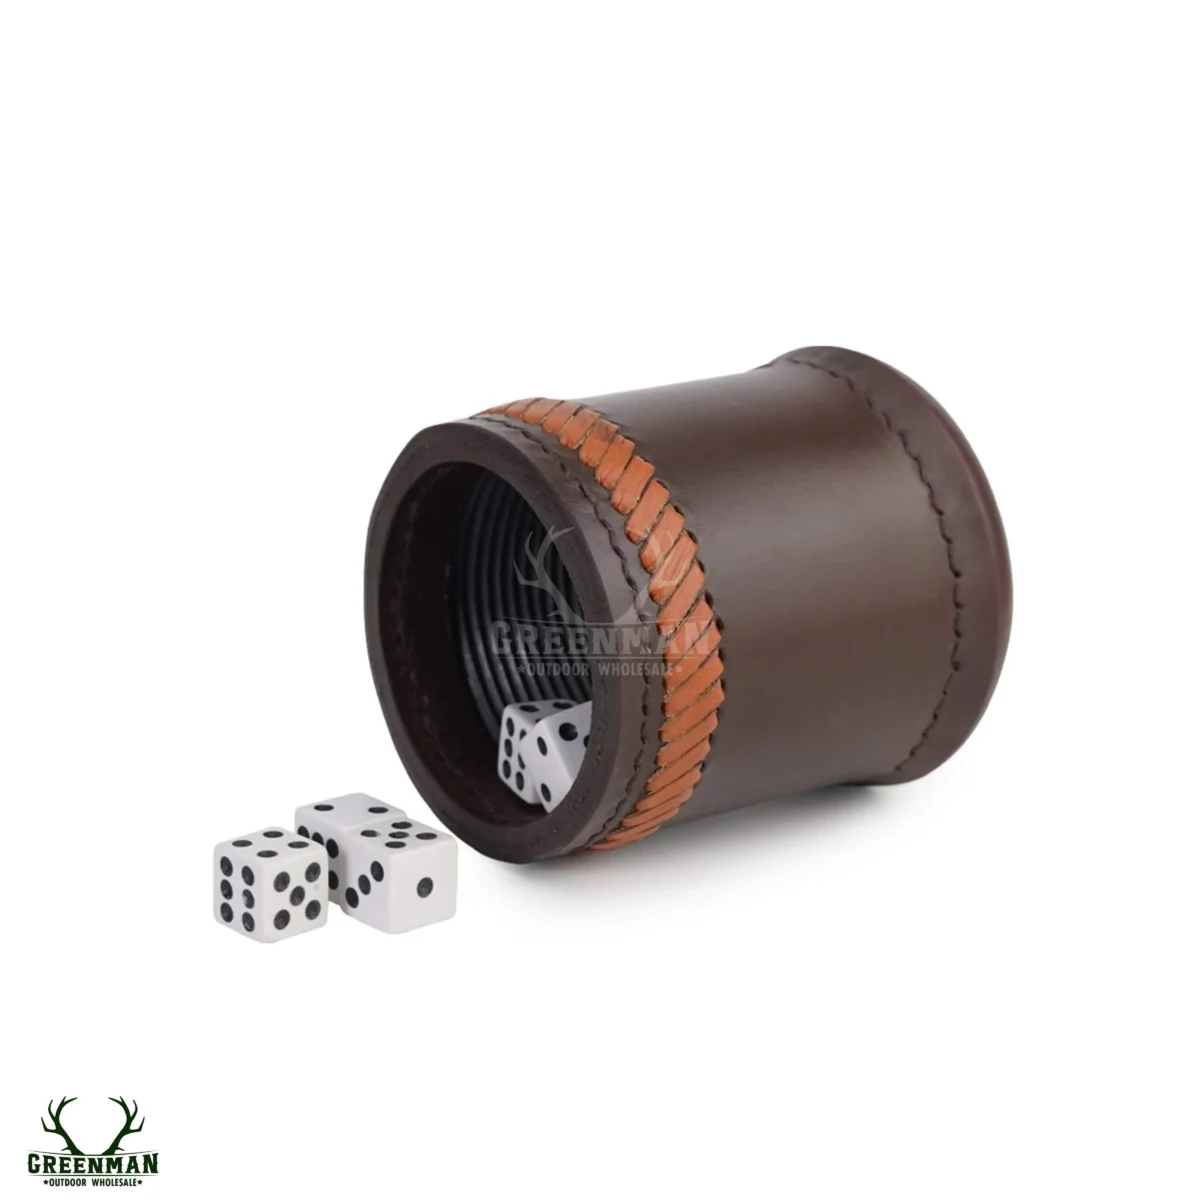 leather dice cups, brown leather dice cups with ribbed interior